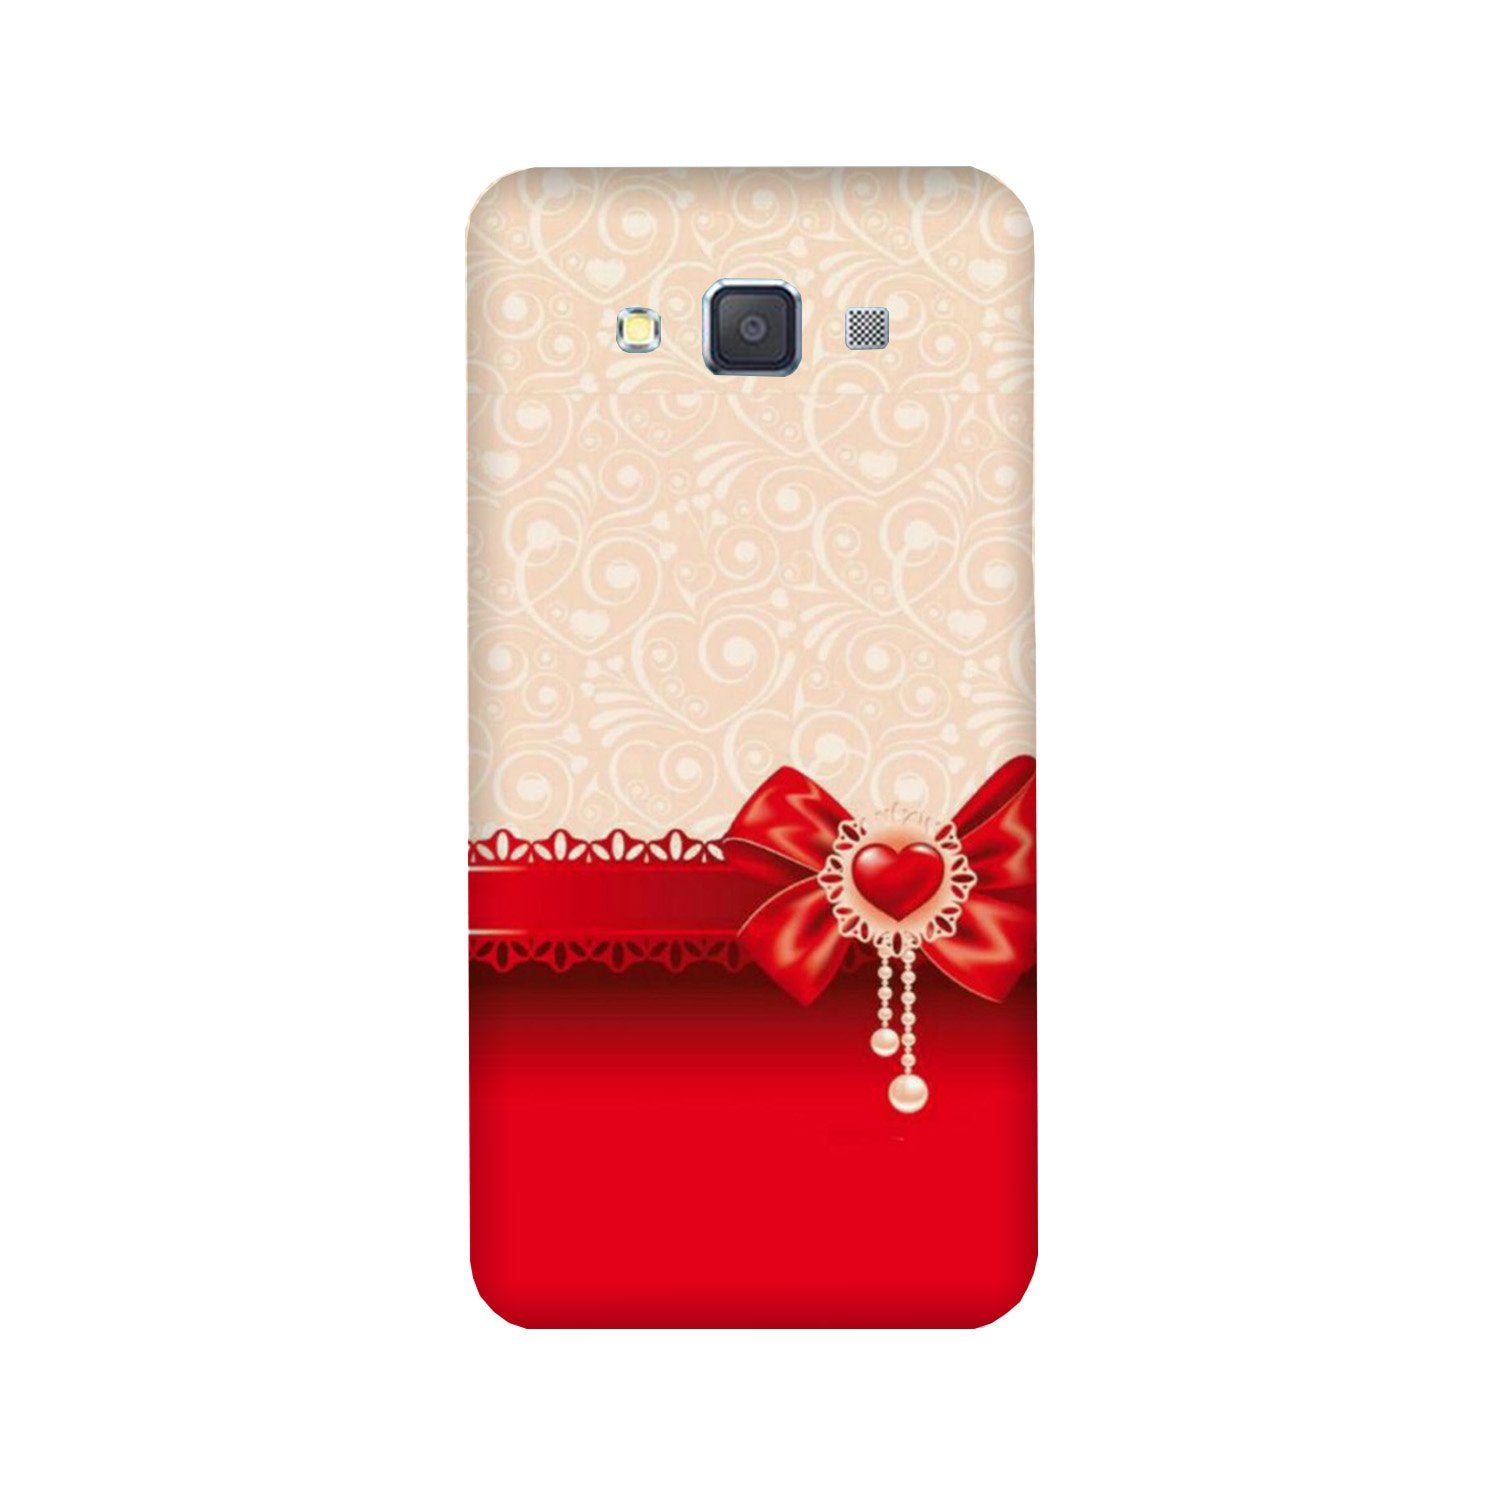 Gift Wrap3 Case for Galaxy Grand Prime